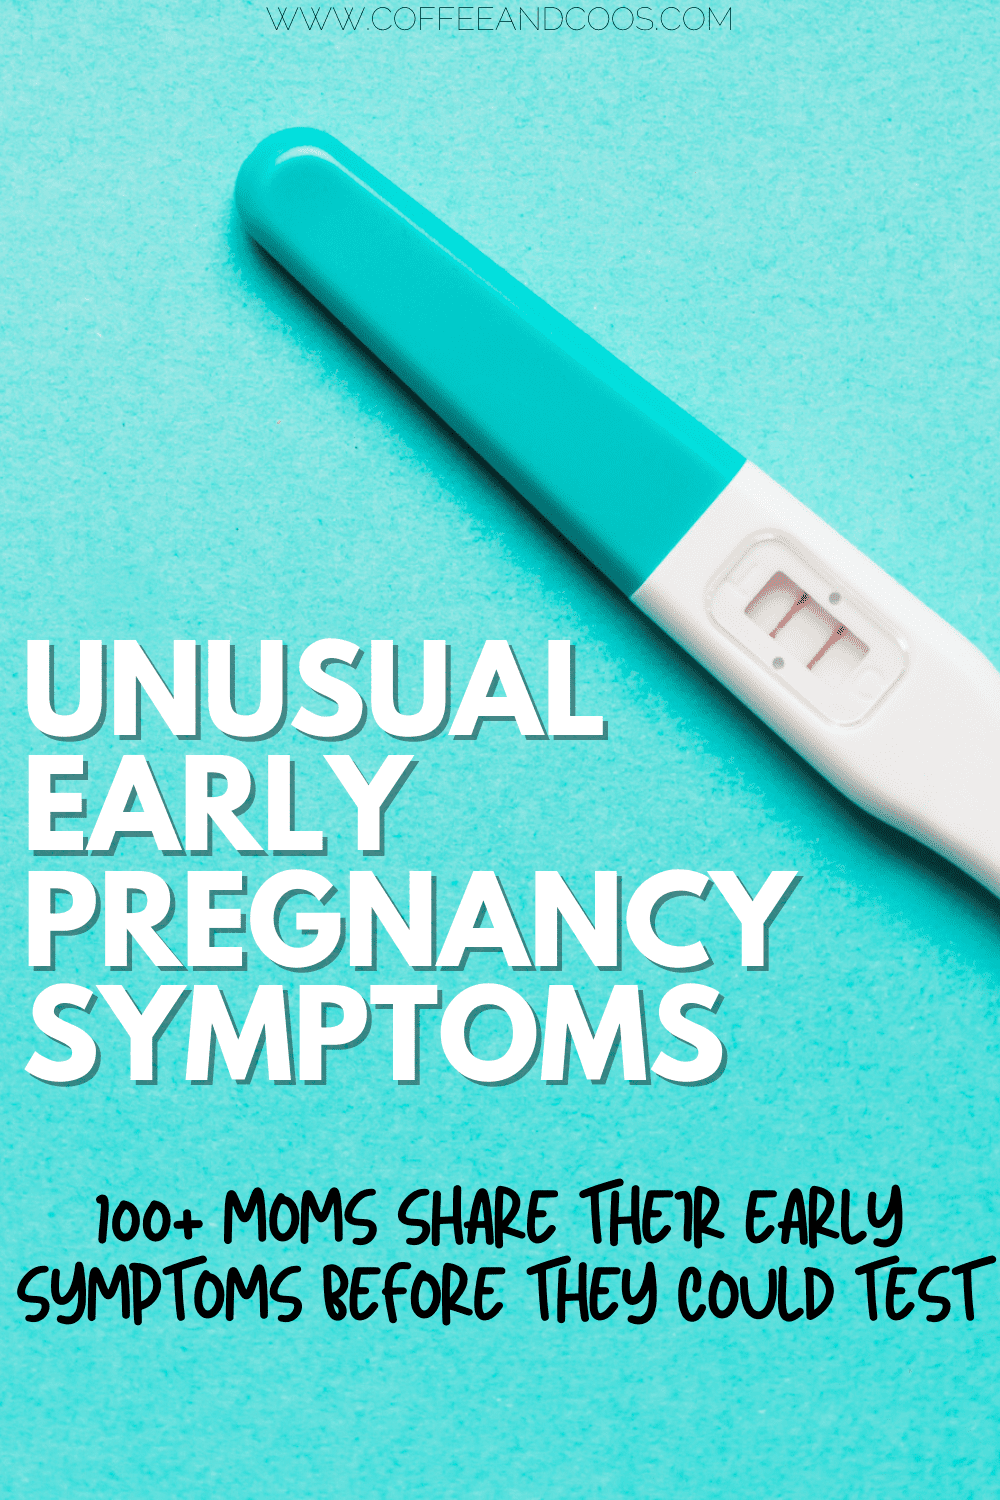 A Complete Checklist of Unusual Early Pregnancy Symptoms - Coffee and Coos